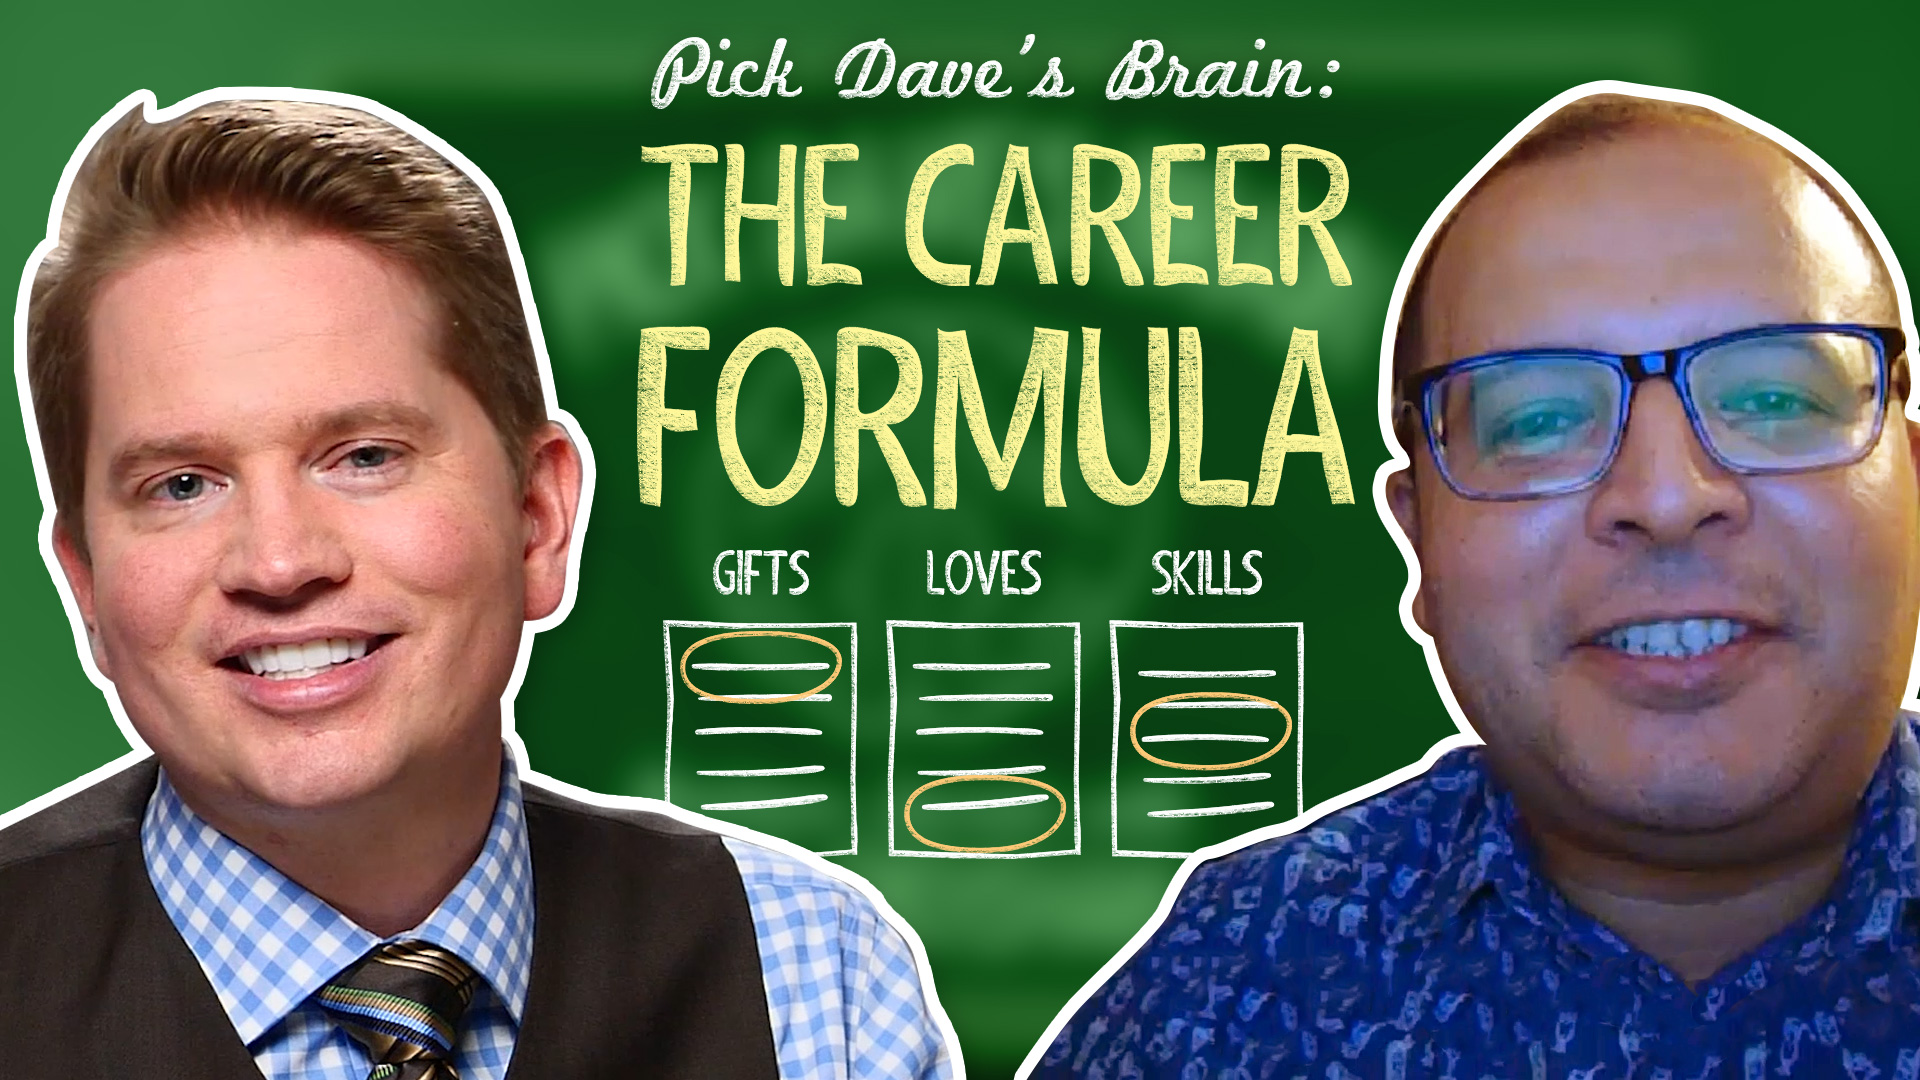 3 Steps to Find Your Dream Career – Pick Dave’s Brain